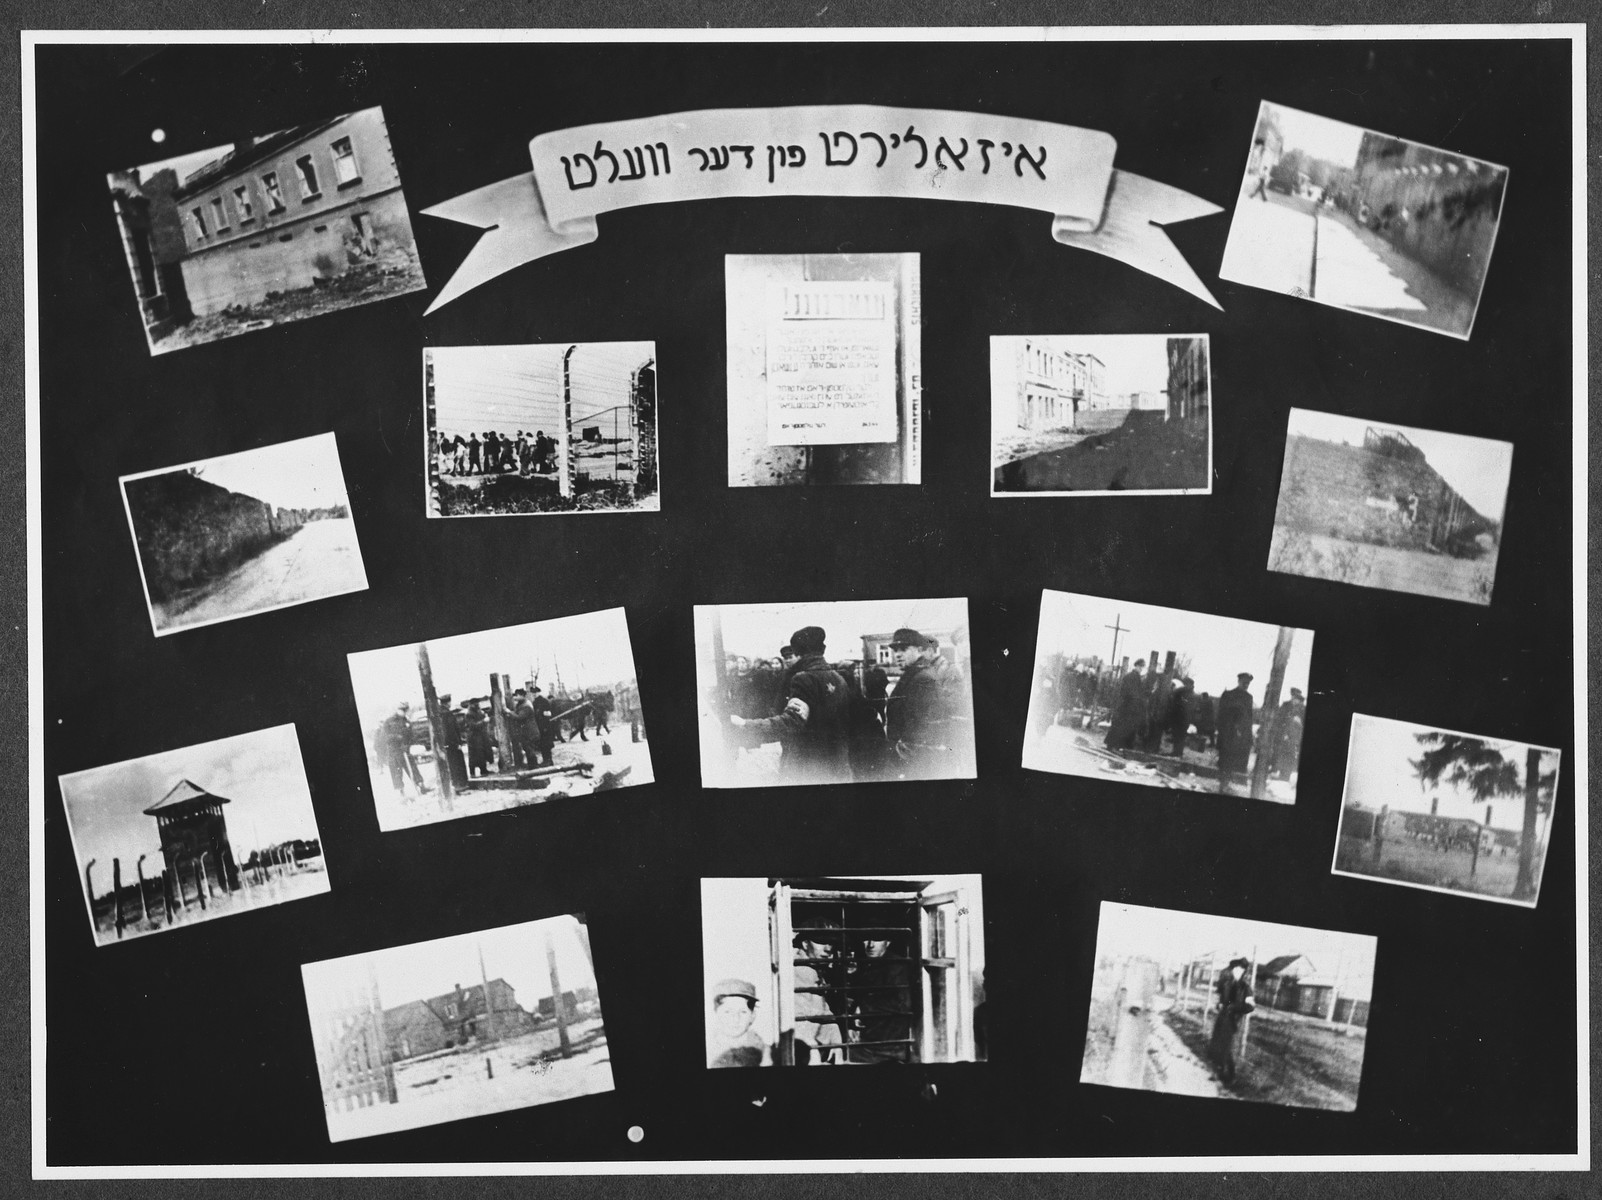 Display panel entitled "Isolation from the World" from a photo exhibition on the Holocaust created by photographer George Kaddish in a displaced persons' camp.

The exhibition consisted both of photographs that he shot in the Kovno ghetto as well as other photographs he collected from other ghettos and camps.